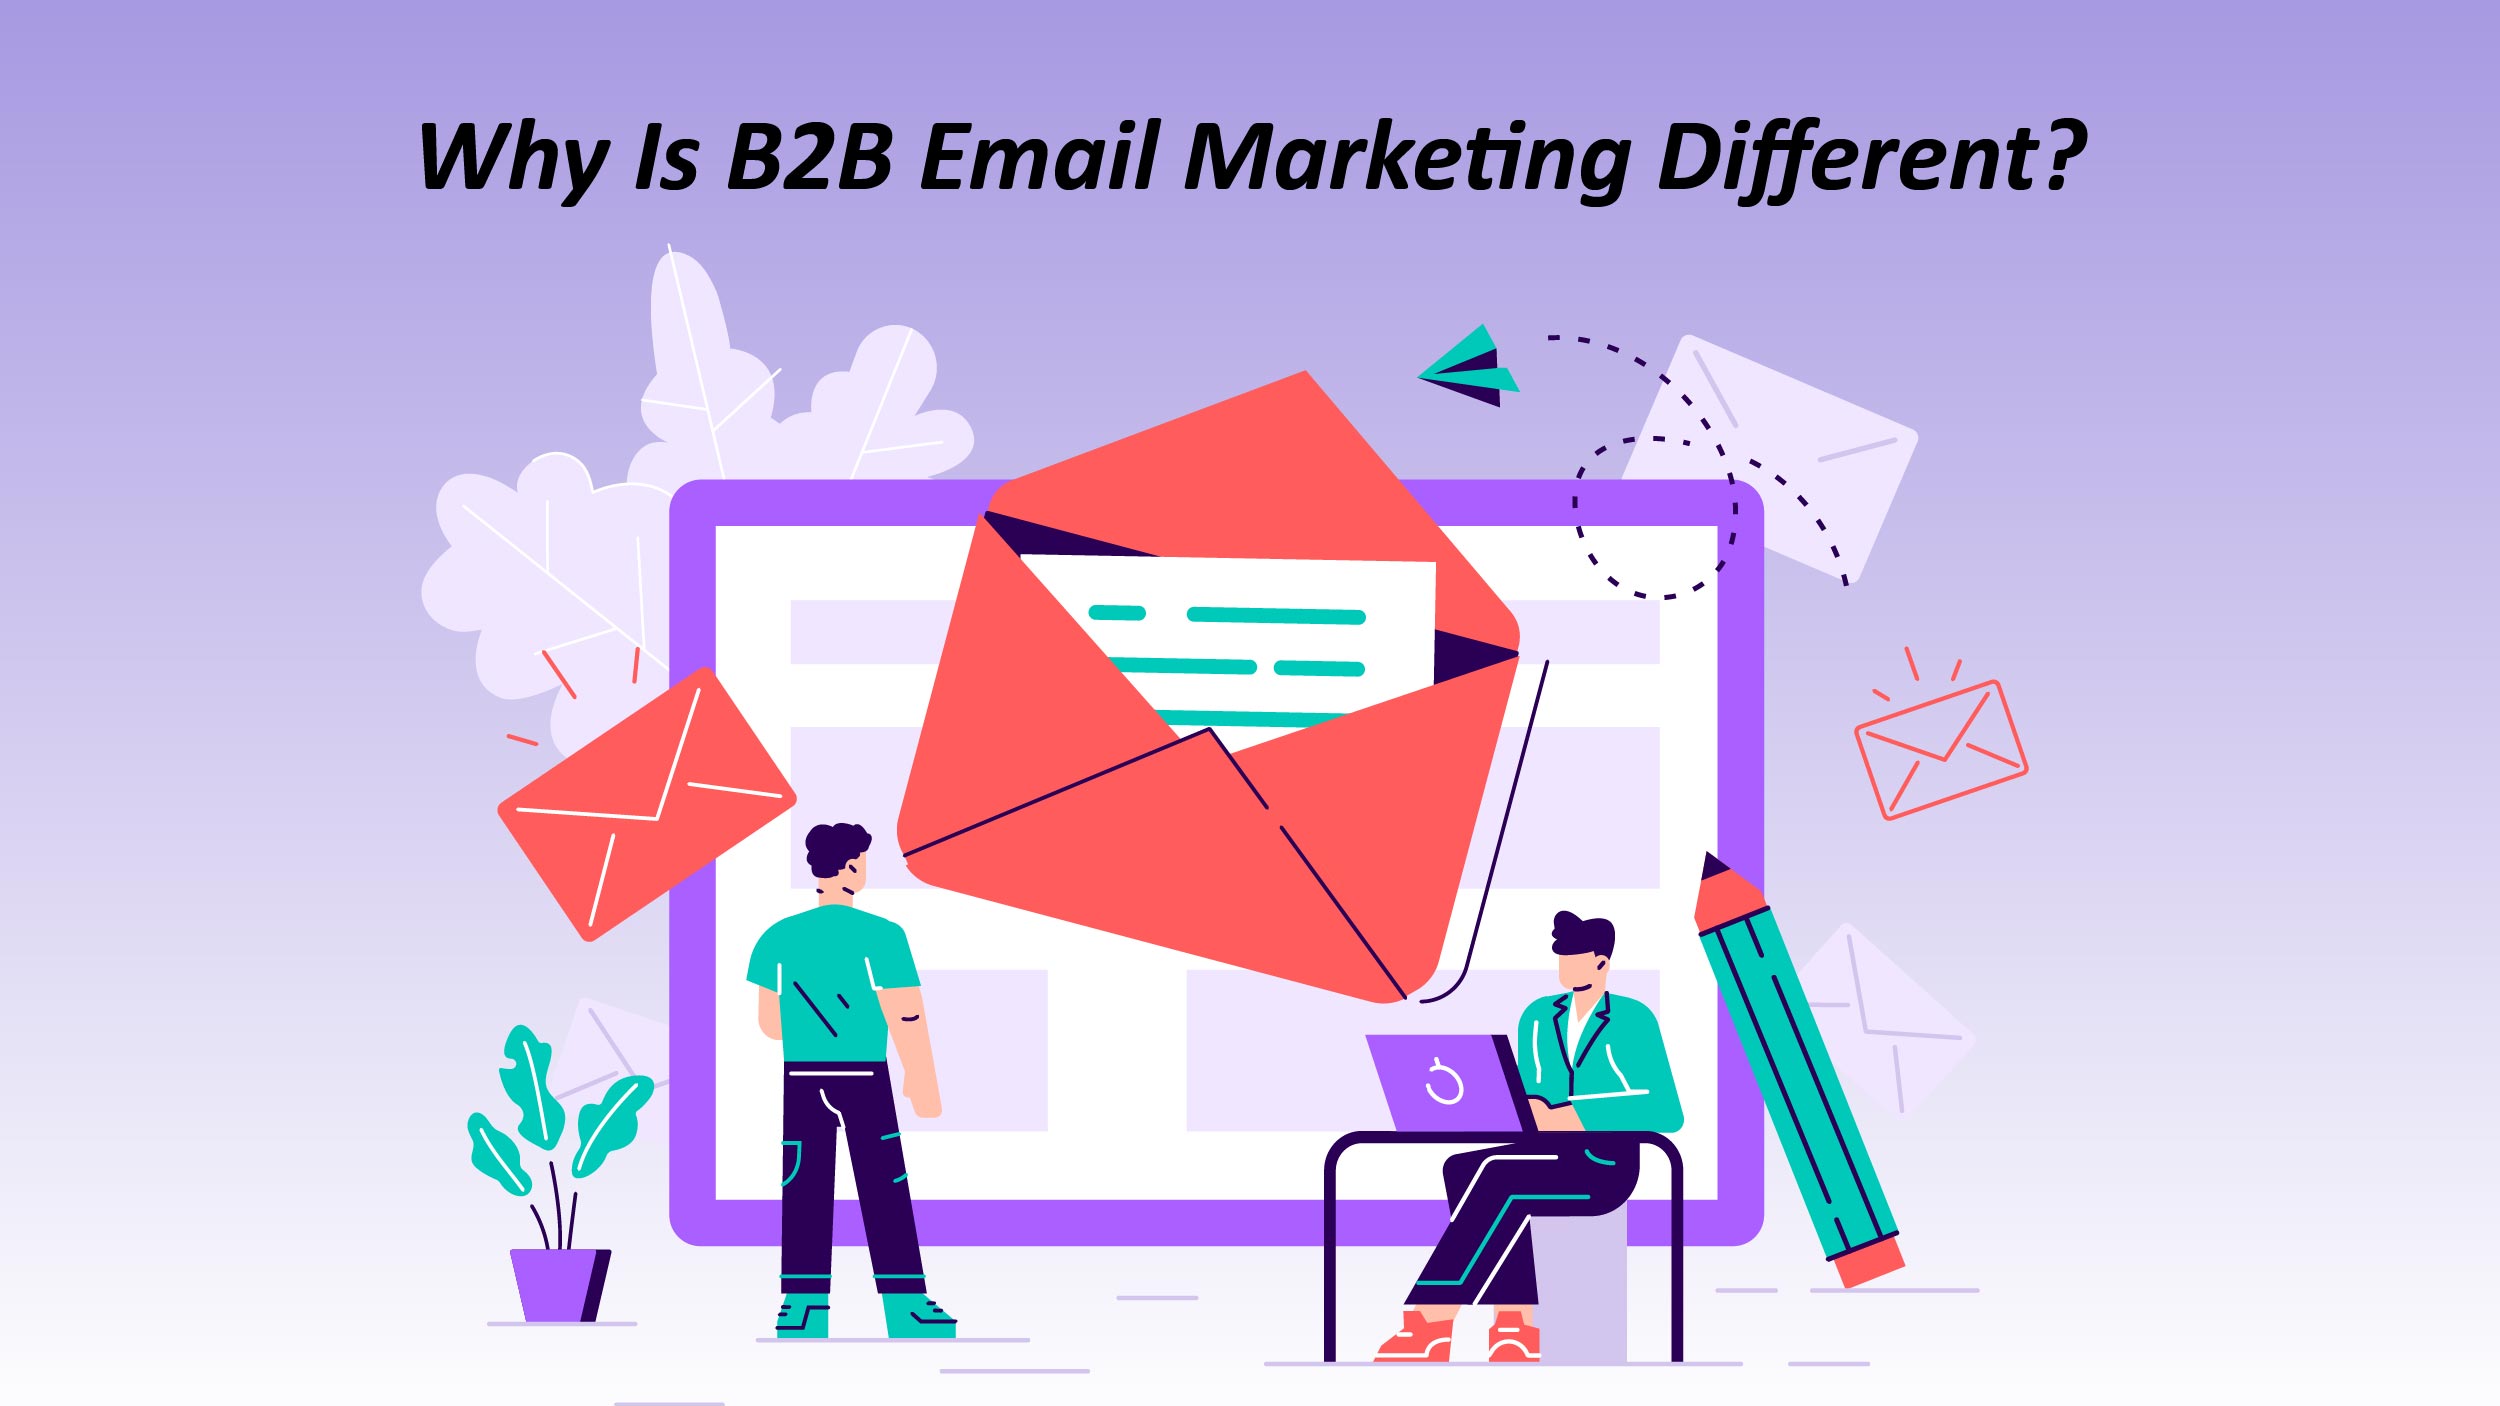 B2B Email Marketing Services